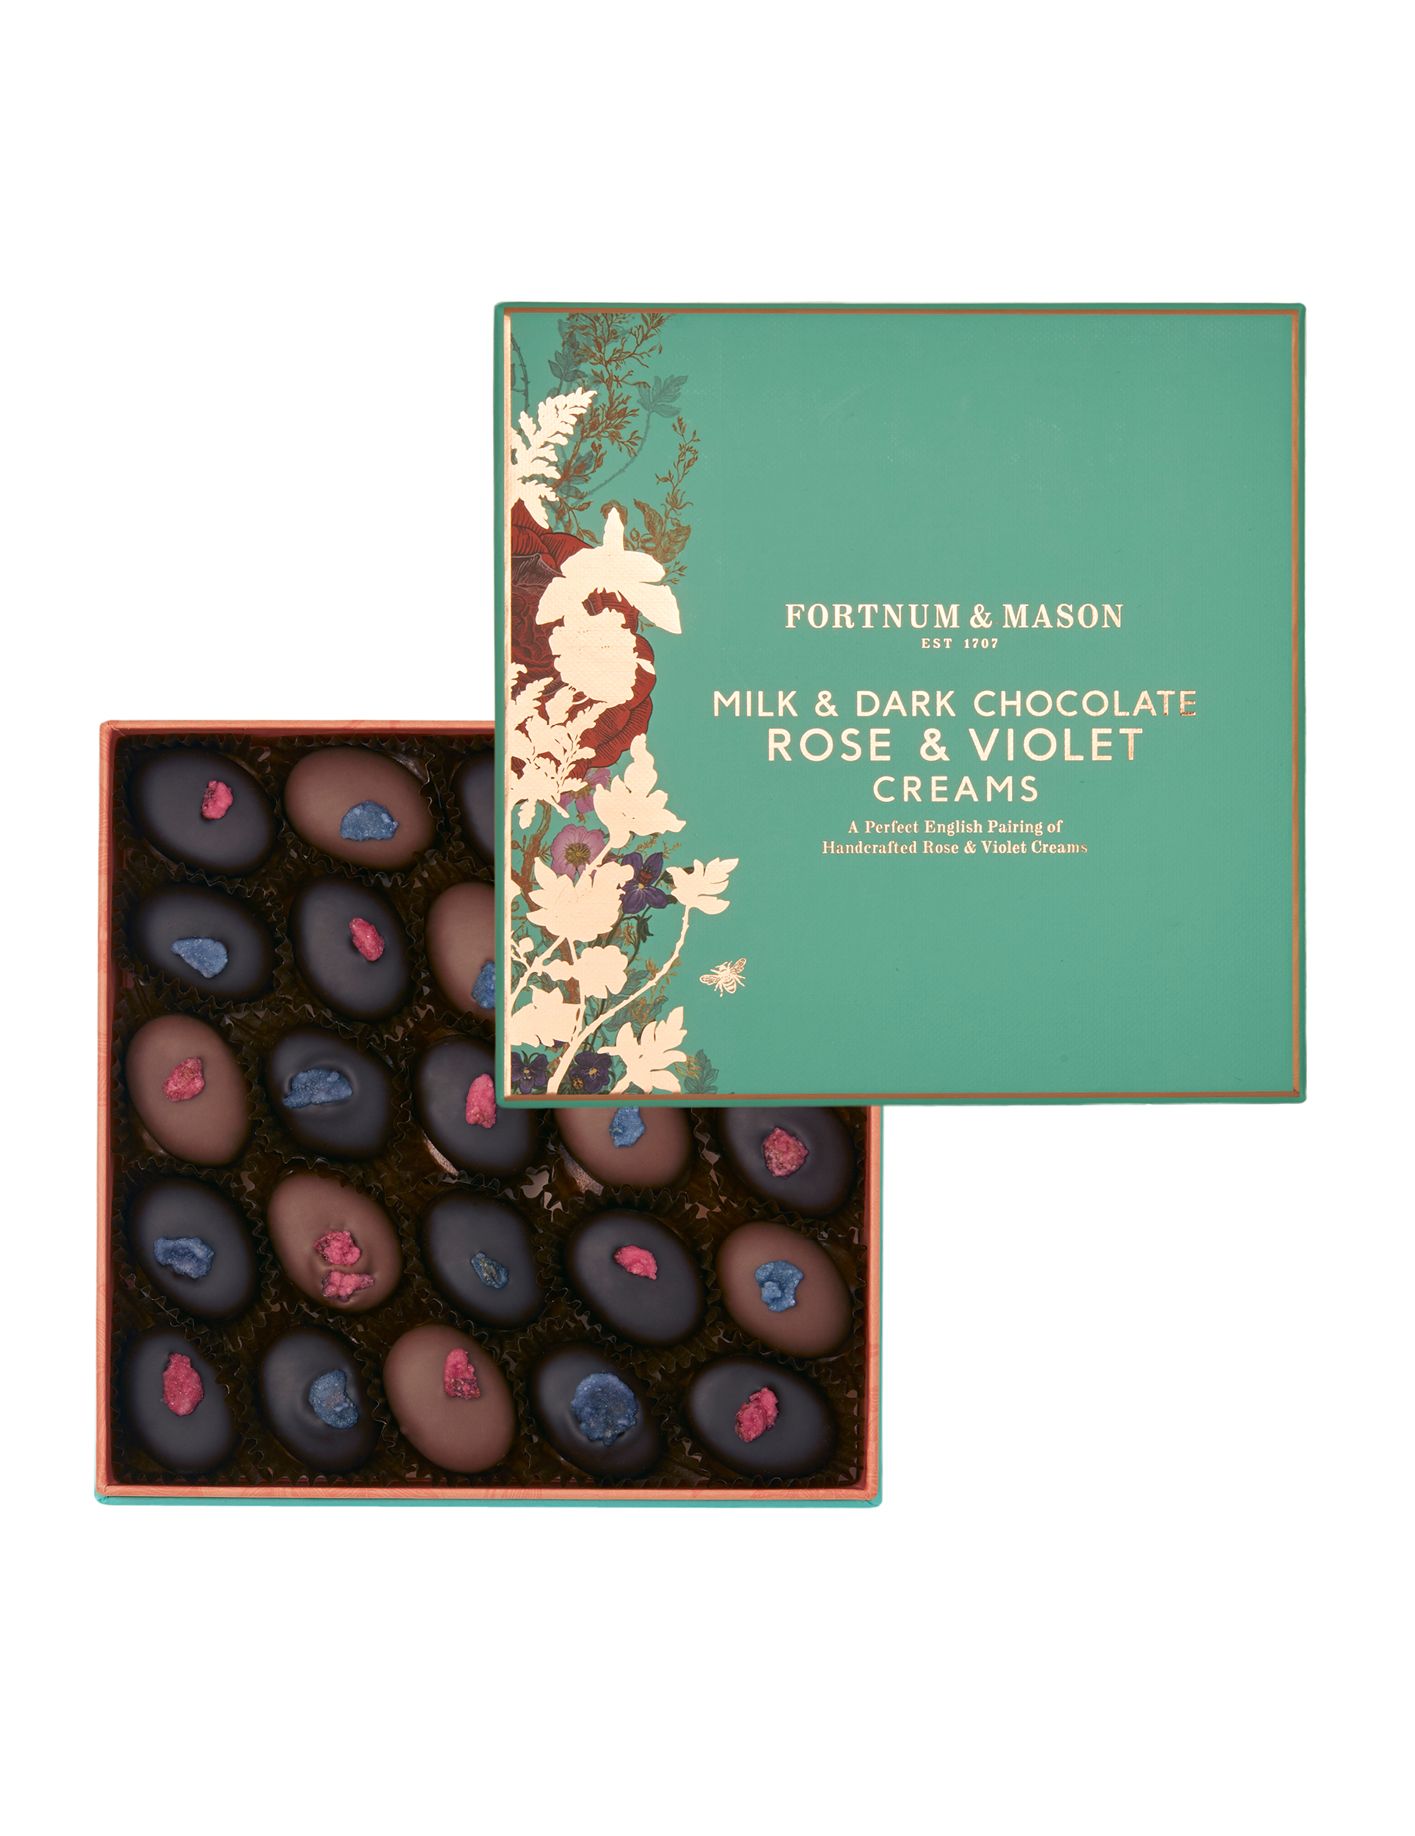 A box of Fortnum's Rose & Violet English Creams